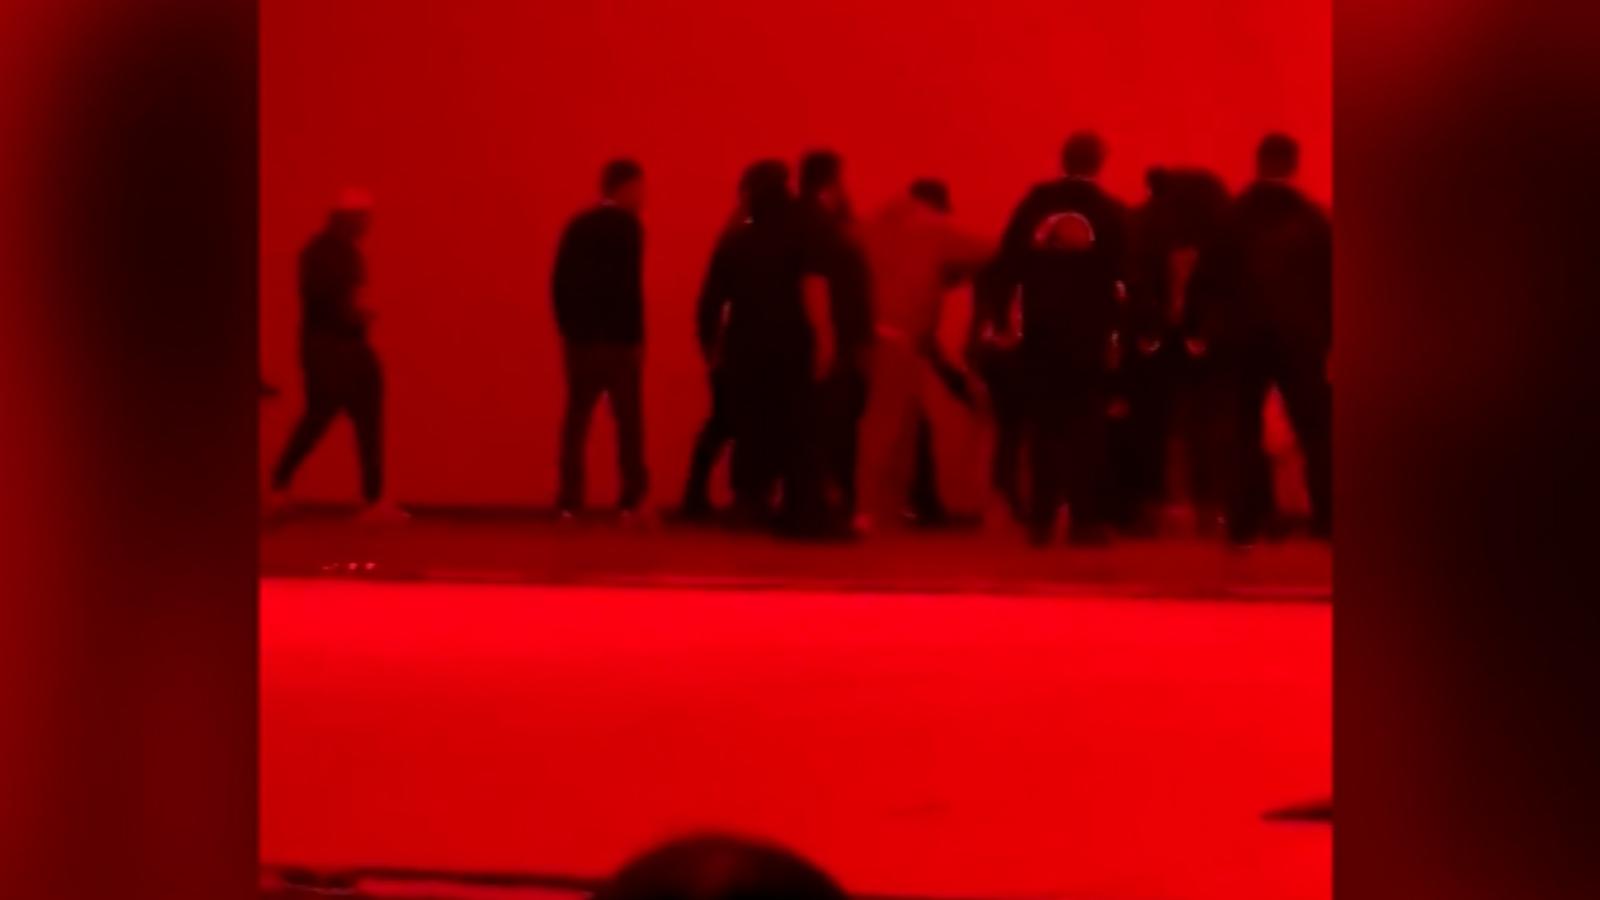 Video of the attack on Dave Chappelle during performance